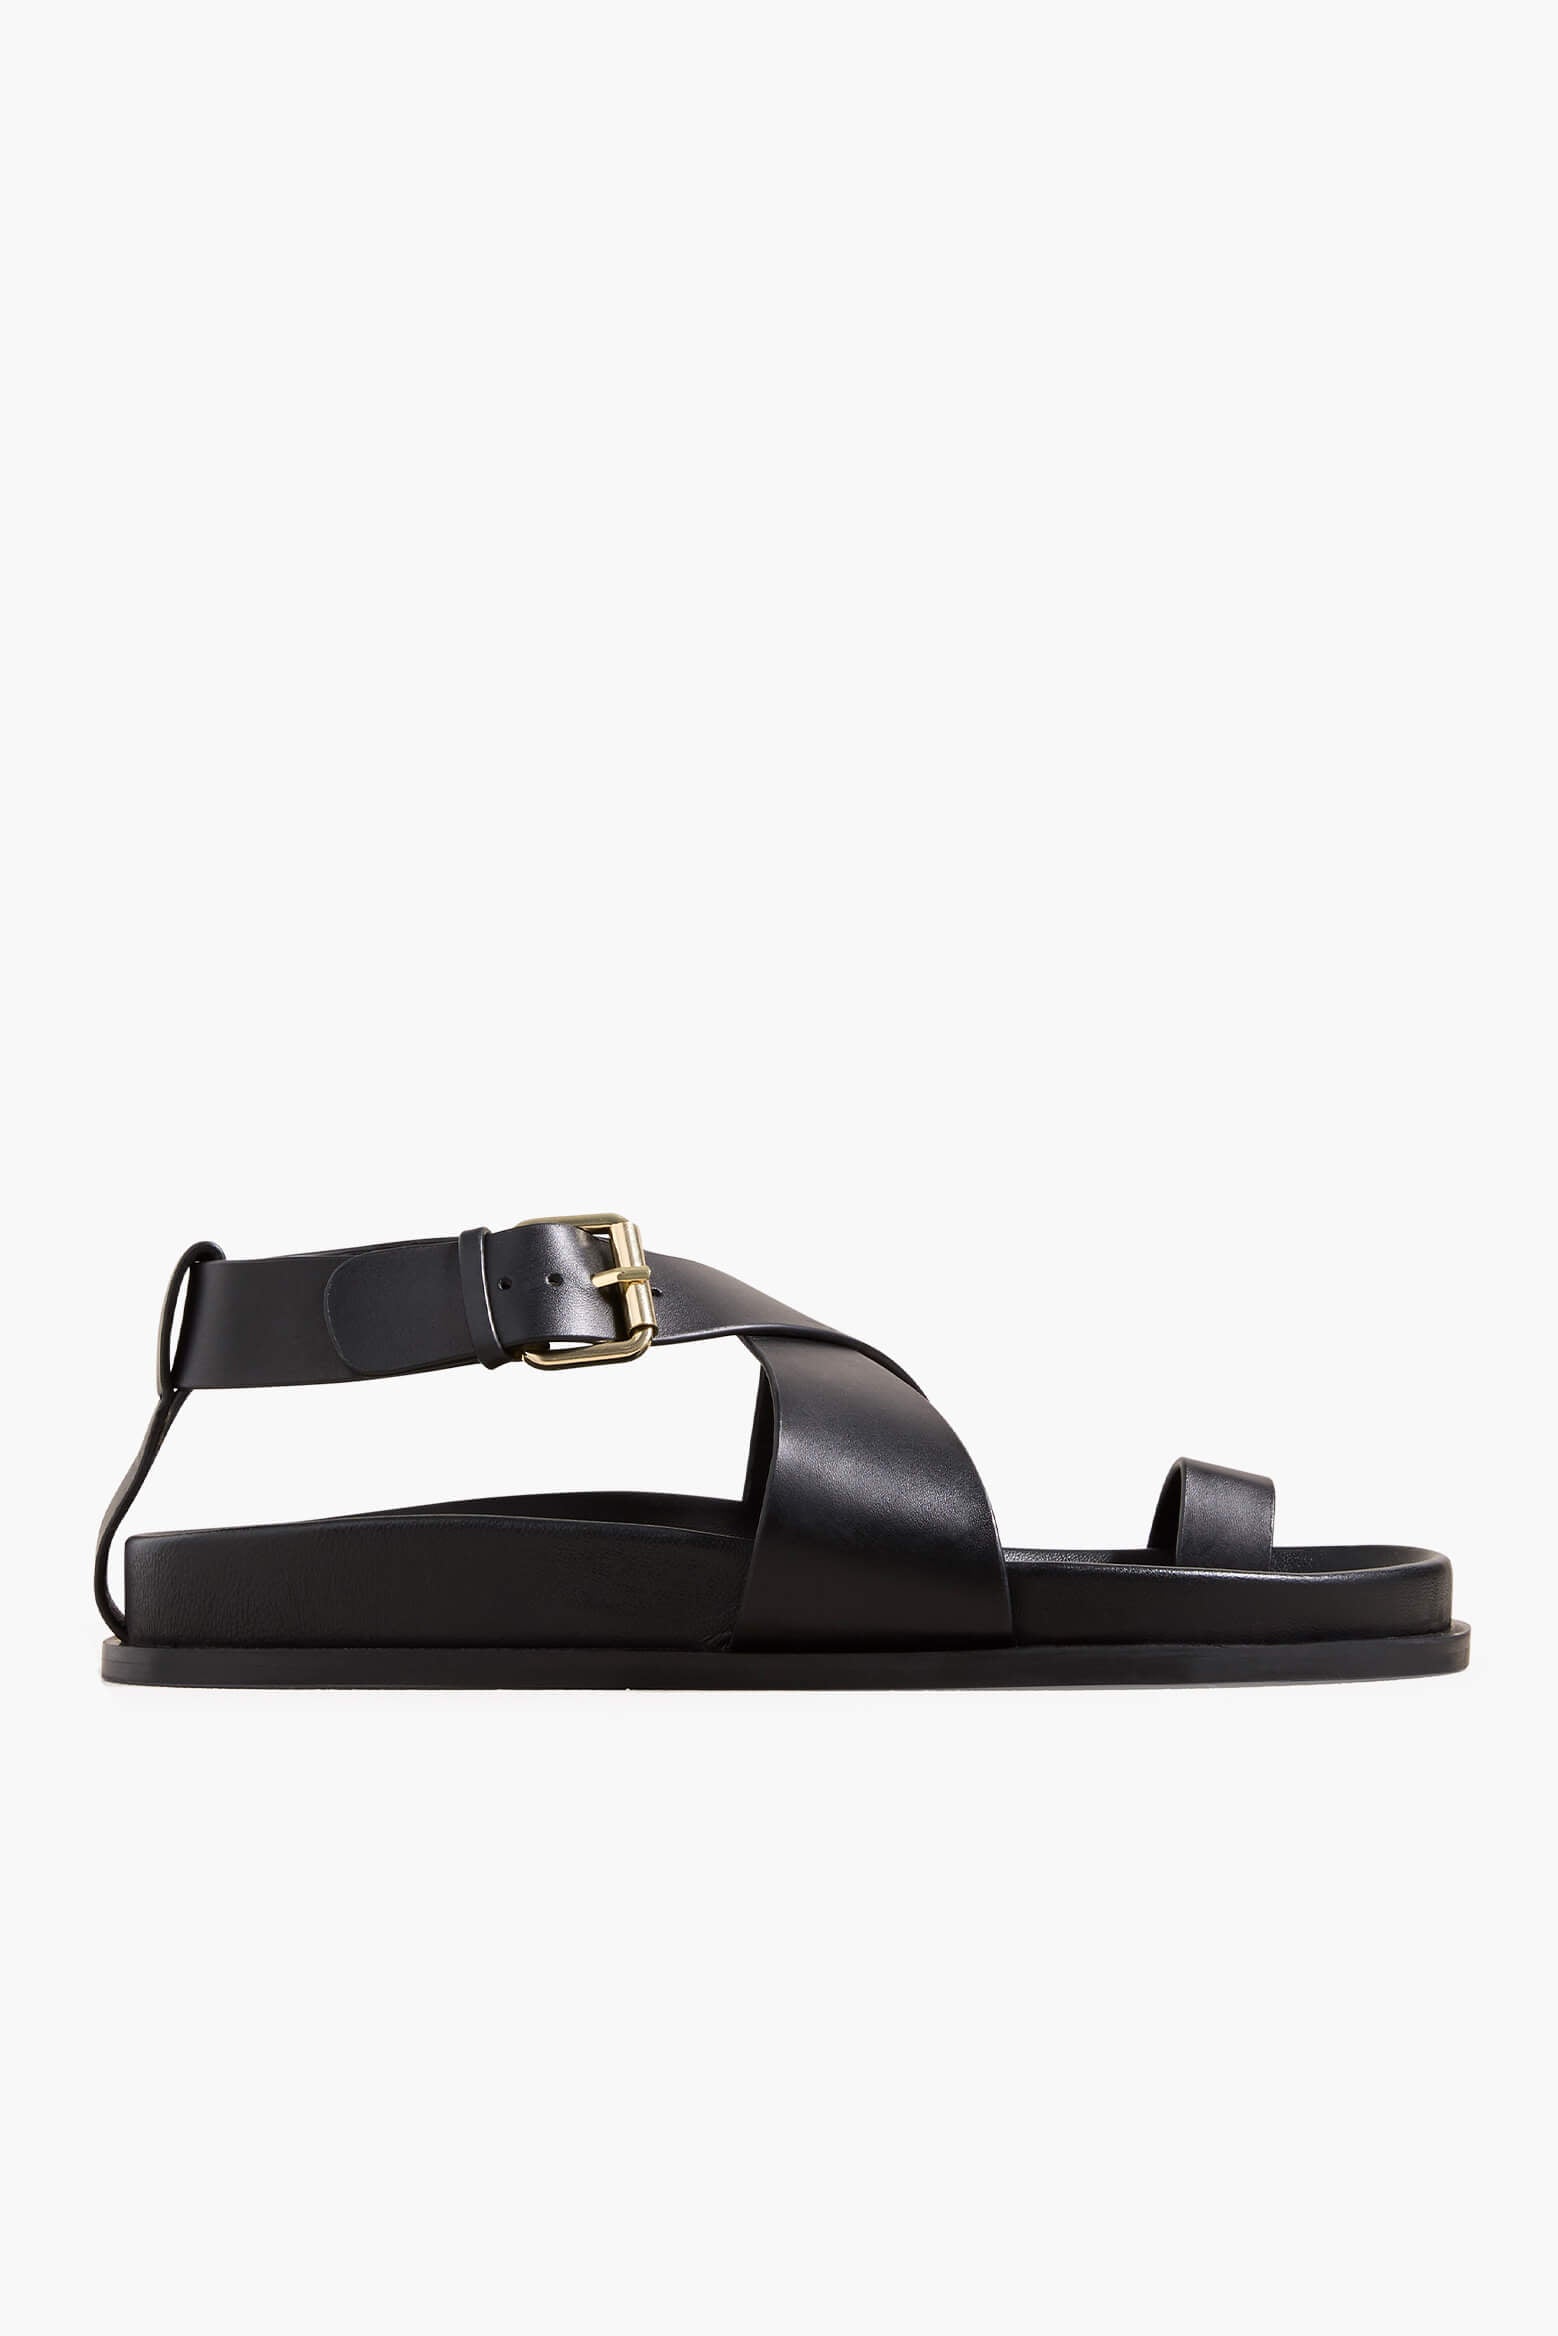 A.Emery Dula Sandal in Black available at The New Trend Australia.